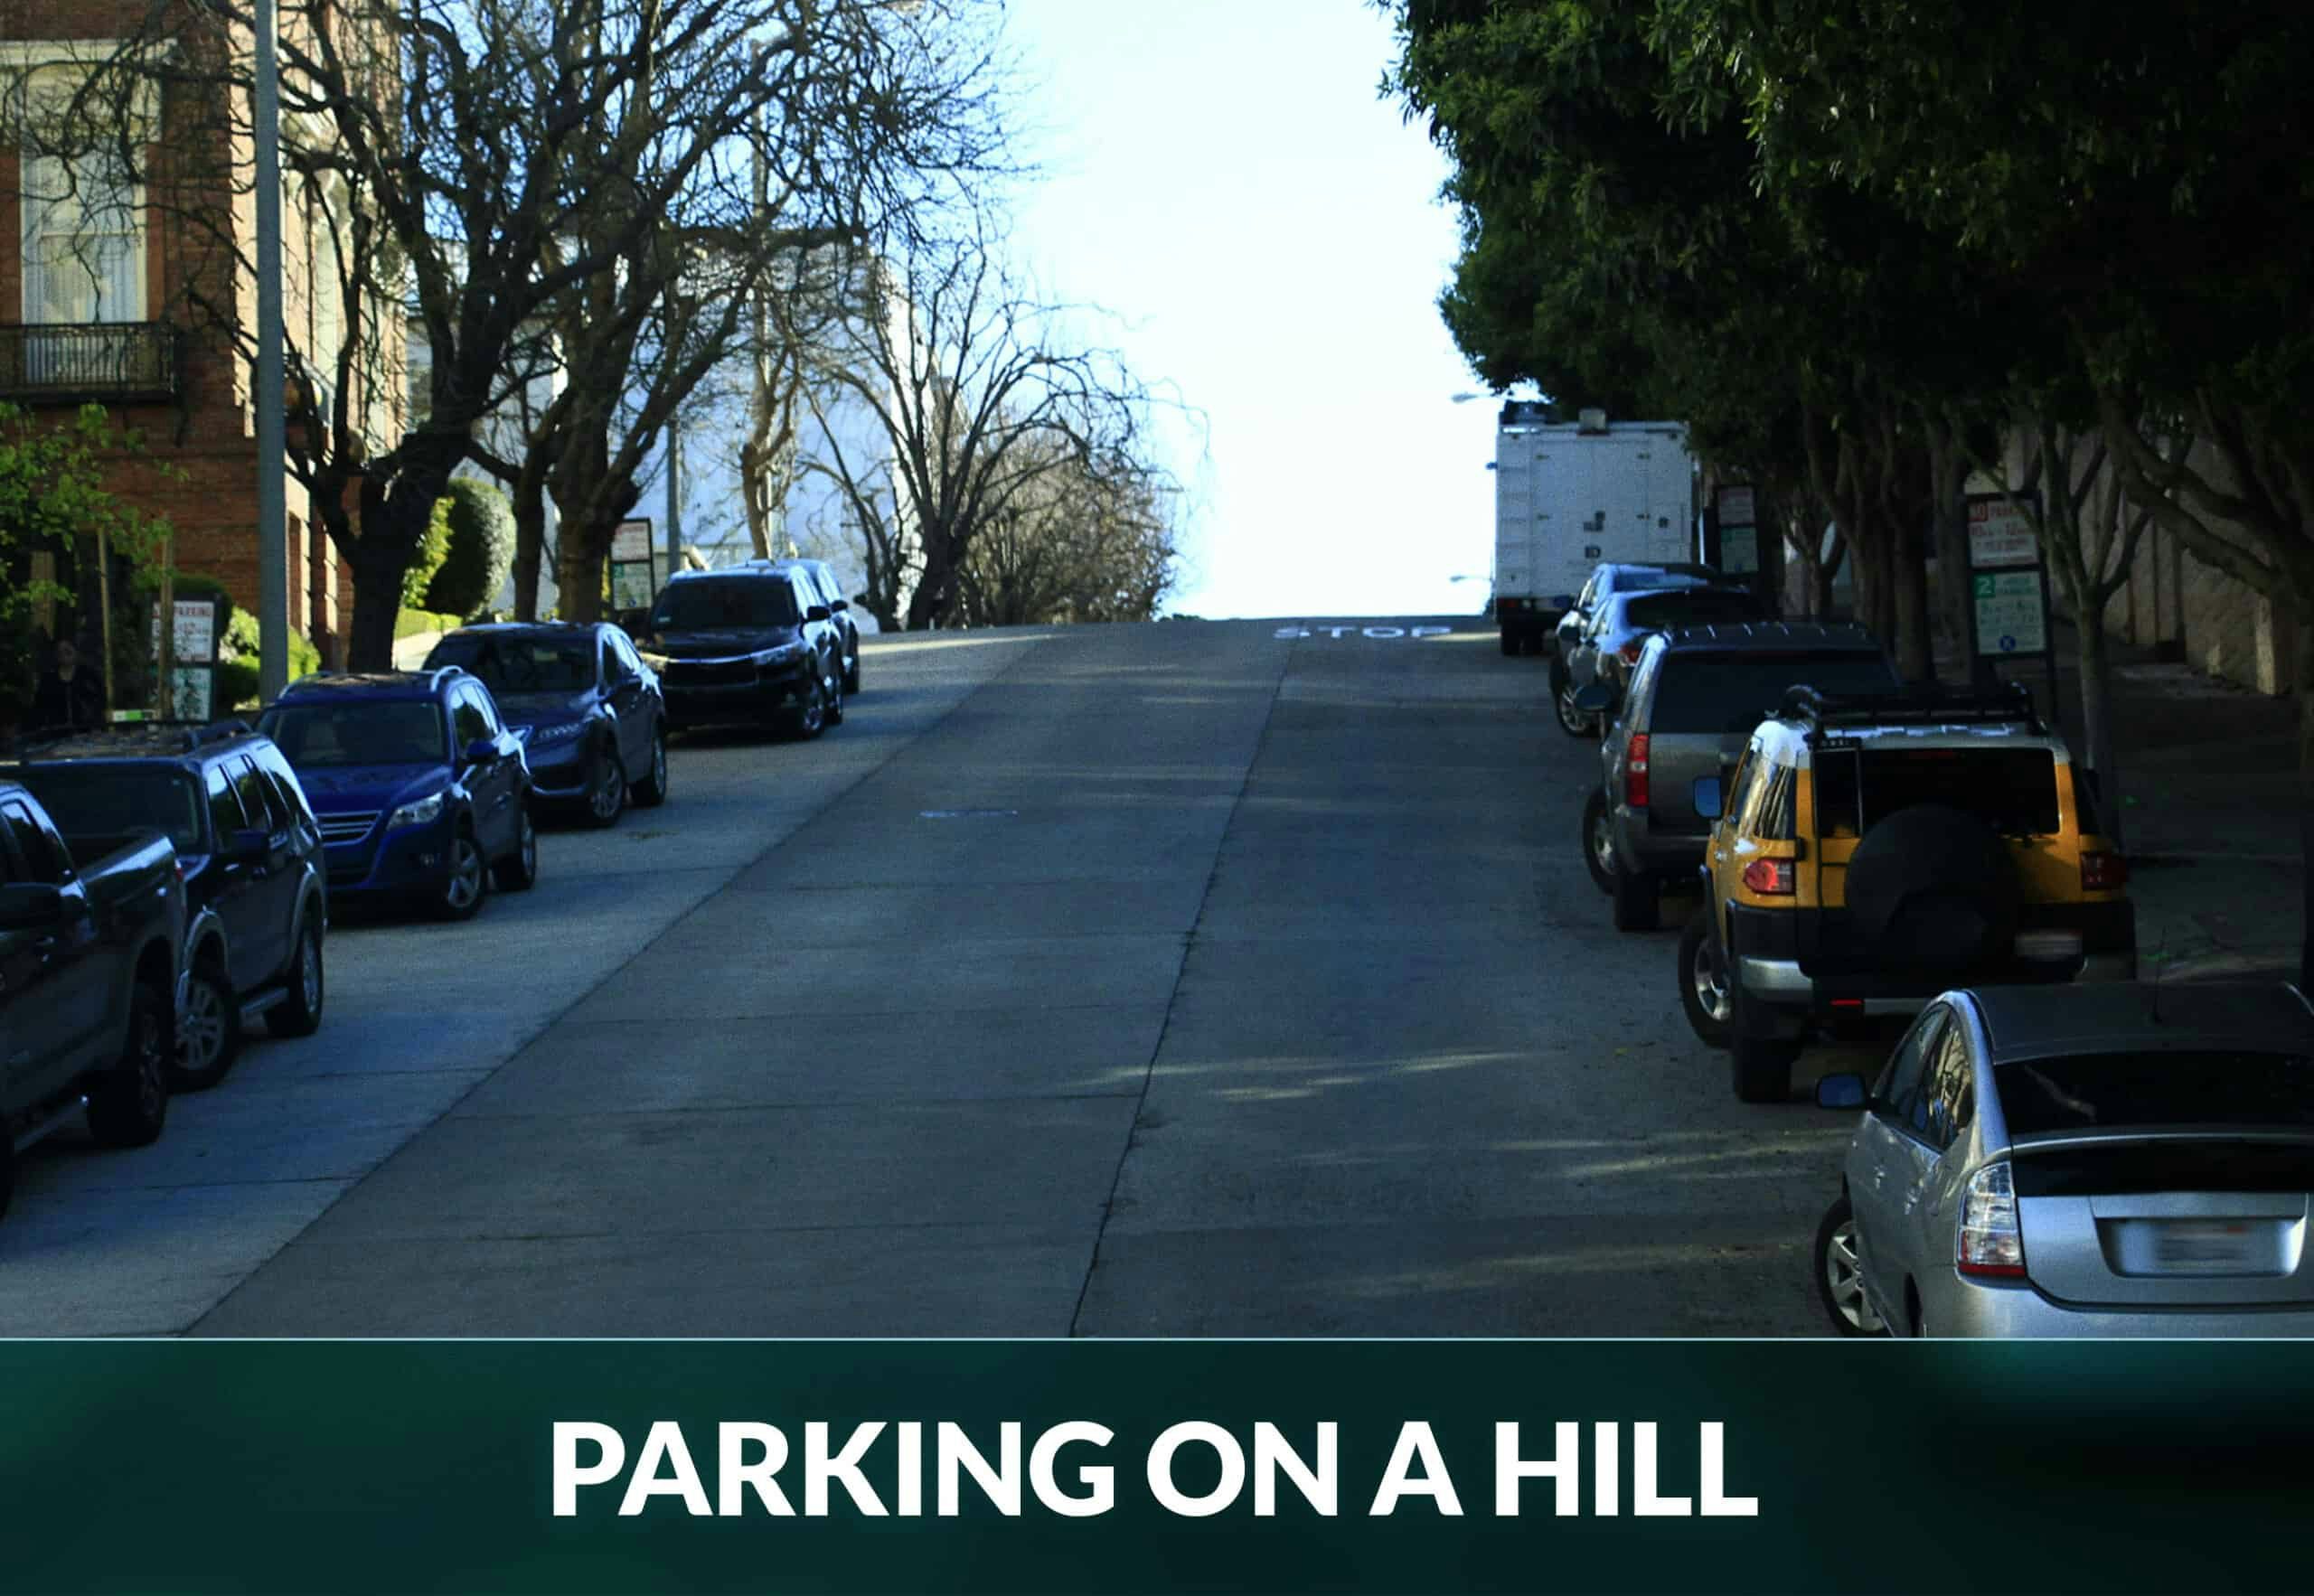 PARKING ON A HILL. UPHILL AND DOWNHILL